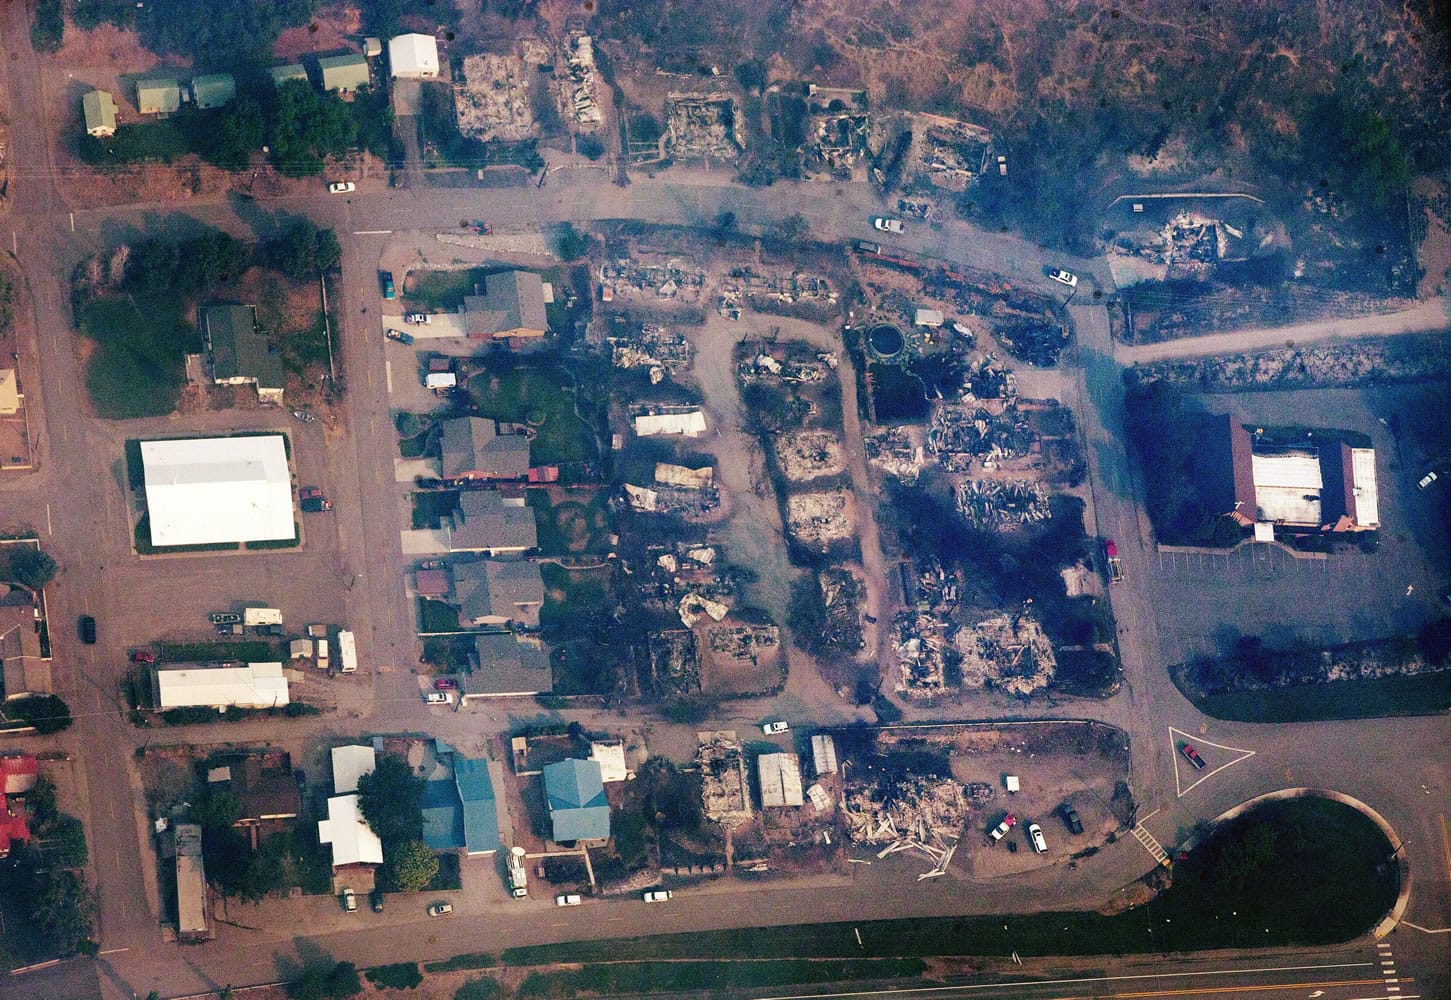 This aerial photo shows a Pateros, Wash. neighborhood that was destroyed by fire on Friday, July 18, 2014, after the Carlton Complex Fire swept through town Thursday night.  Authorities say the wildfire has already burned about 100 homes and prompted the evacuation of Pateros, home to about 650 people in Okanogan County. A hospital in nearby Brewster was also evacuated as a precaution.